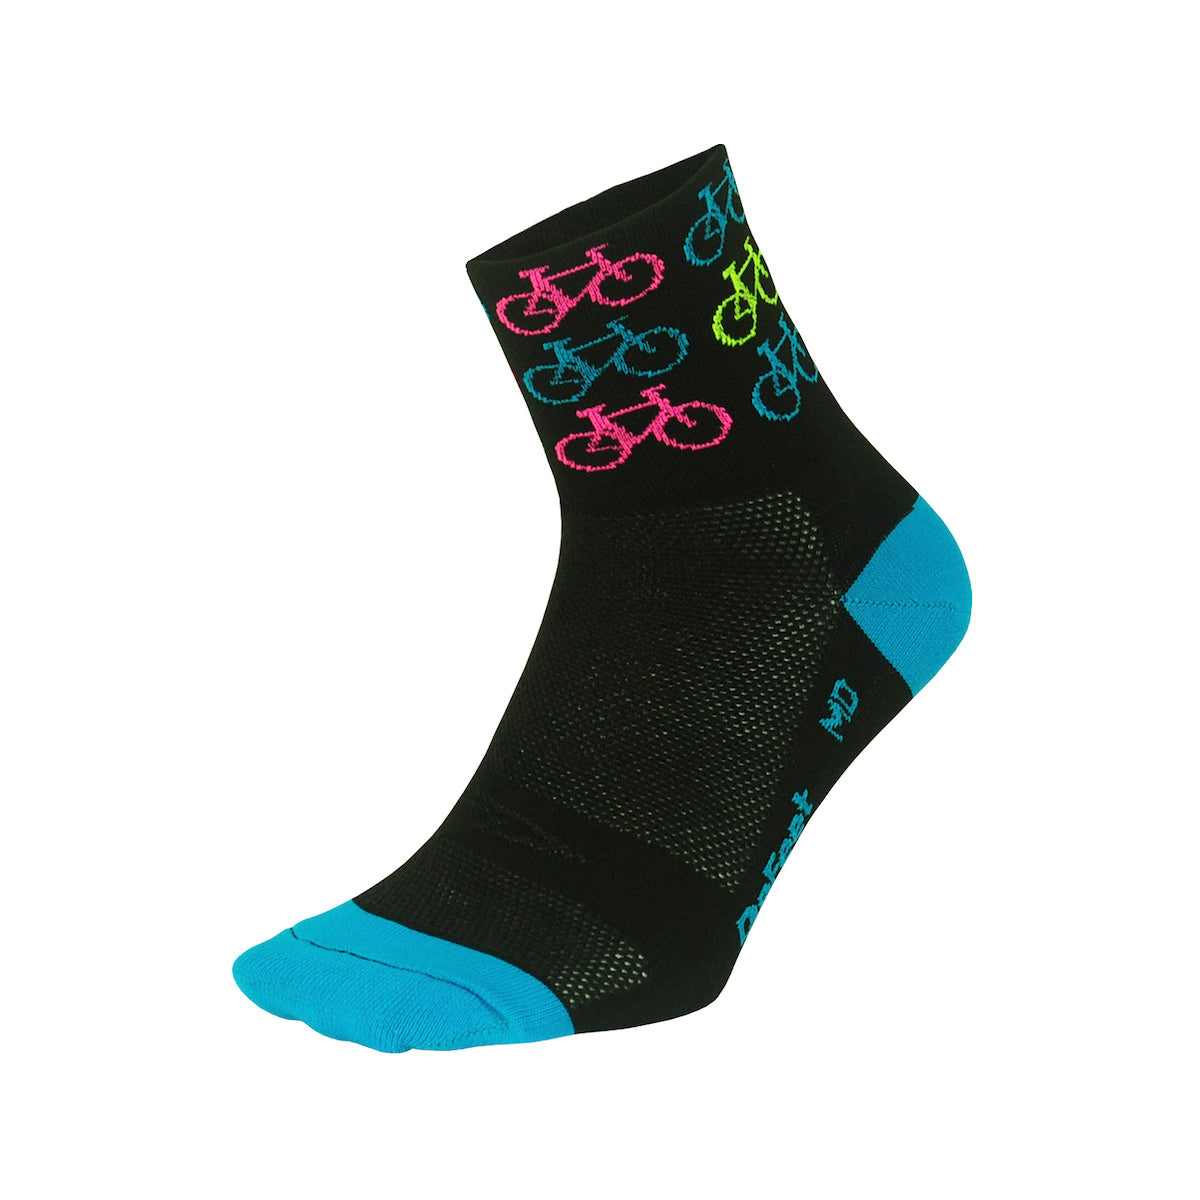 Aireator 3" cuff cycling sock in black with blue heel & toe with repeating bike pattern in neon colors on cuff